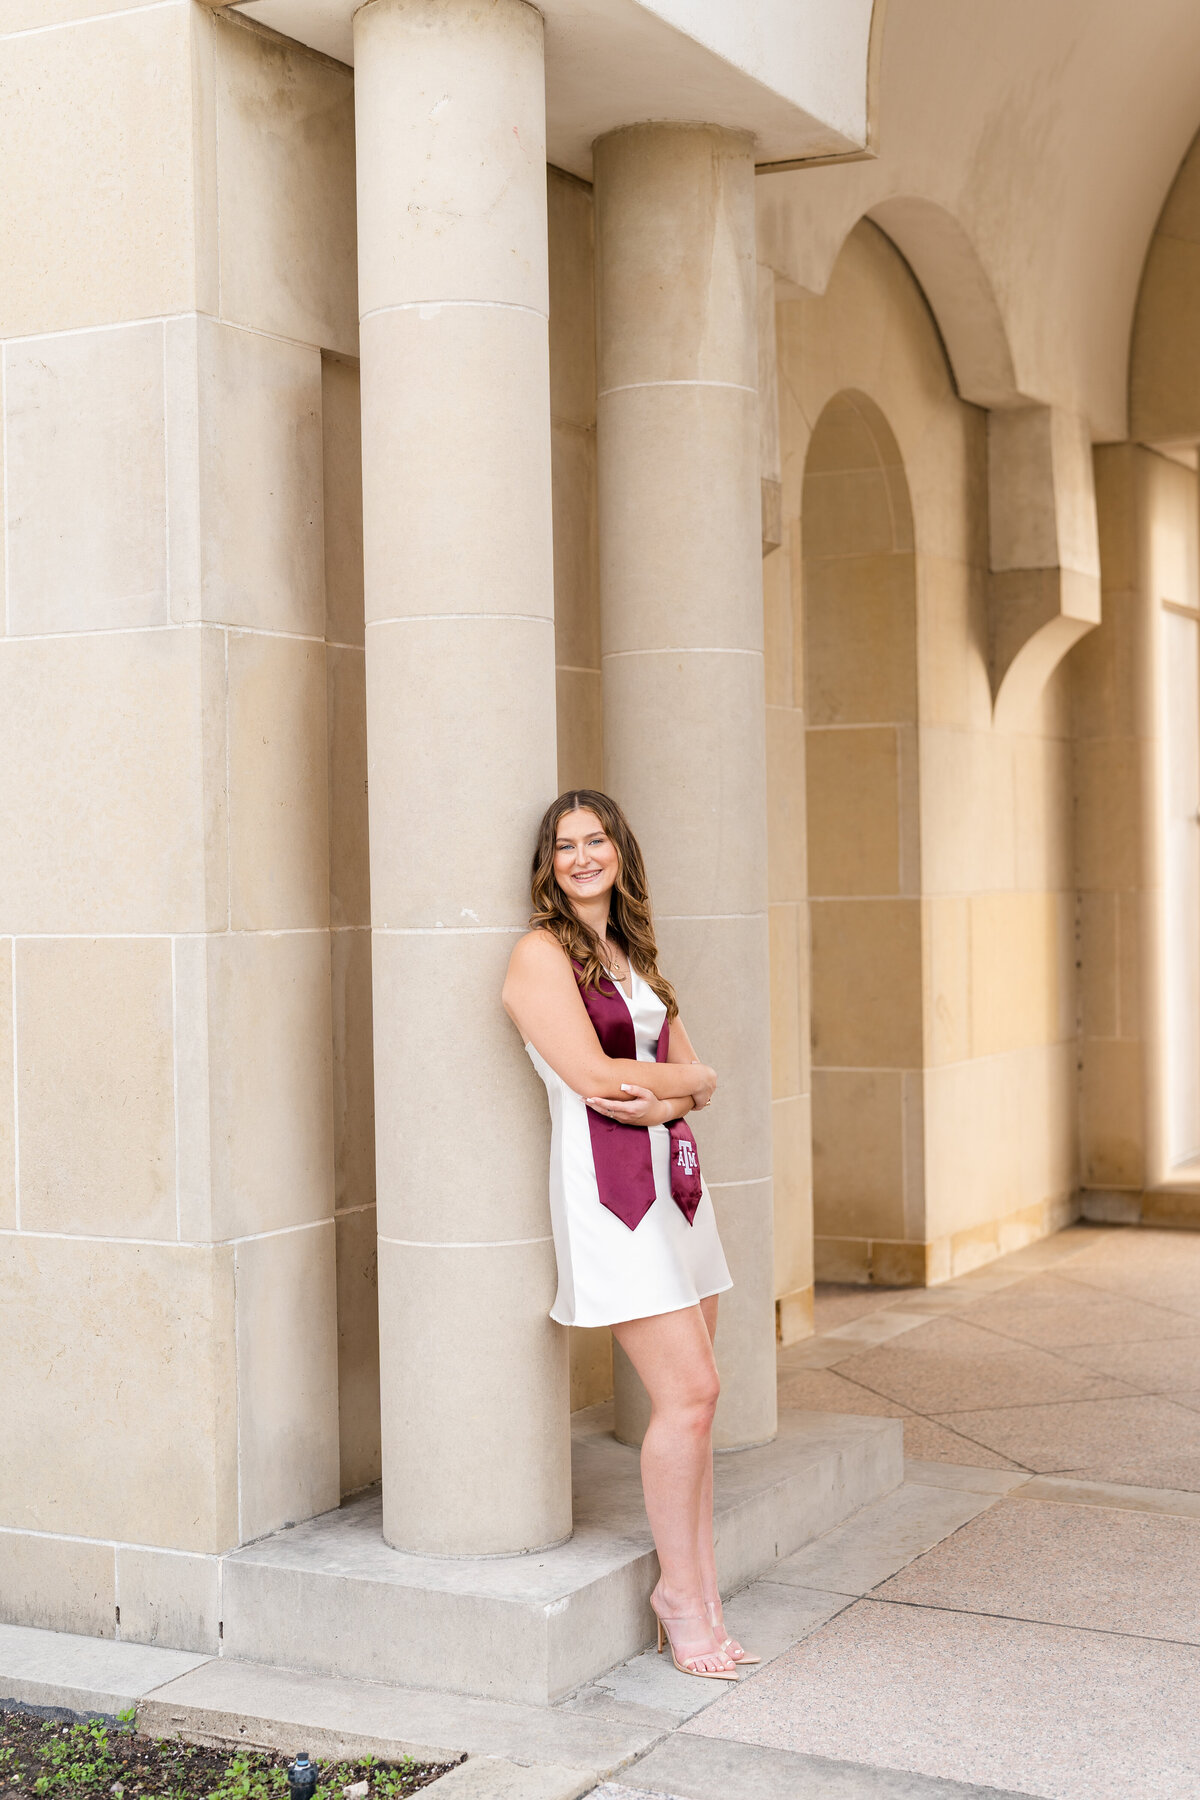 Texas A&M senior girl crossing arms and leaning against column  while wearing white dress and Aggie stole and smiling away at Bell Tower